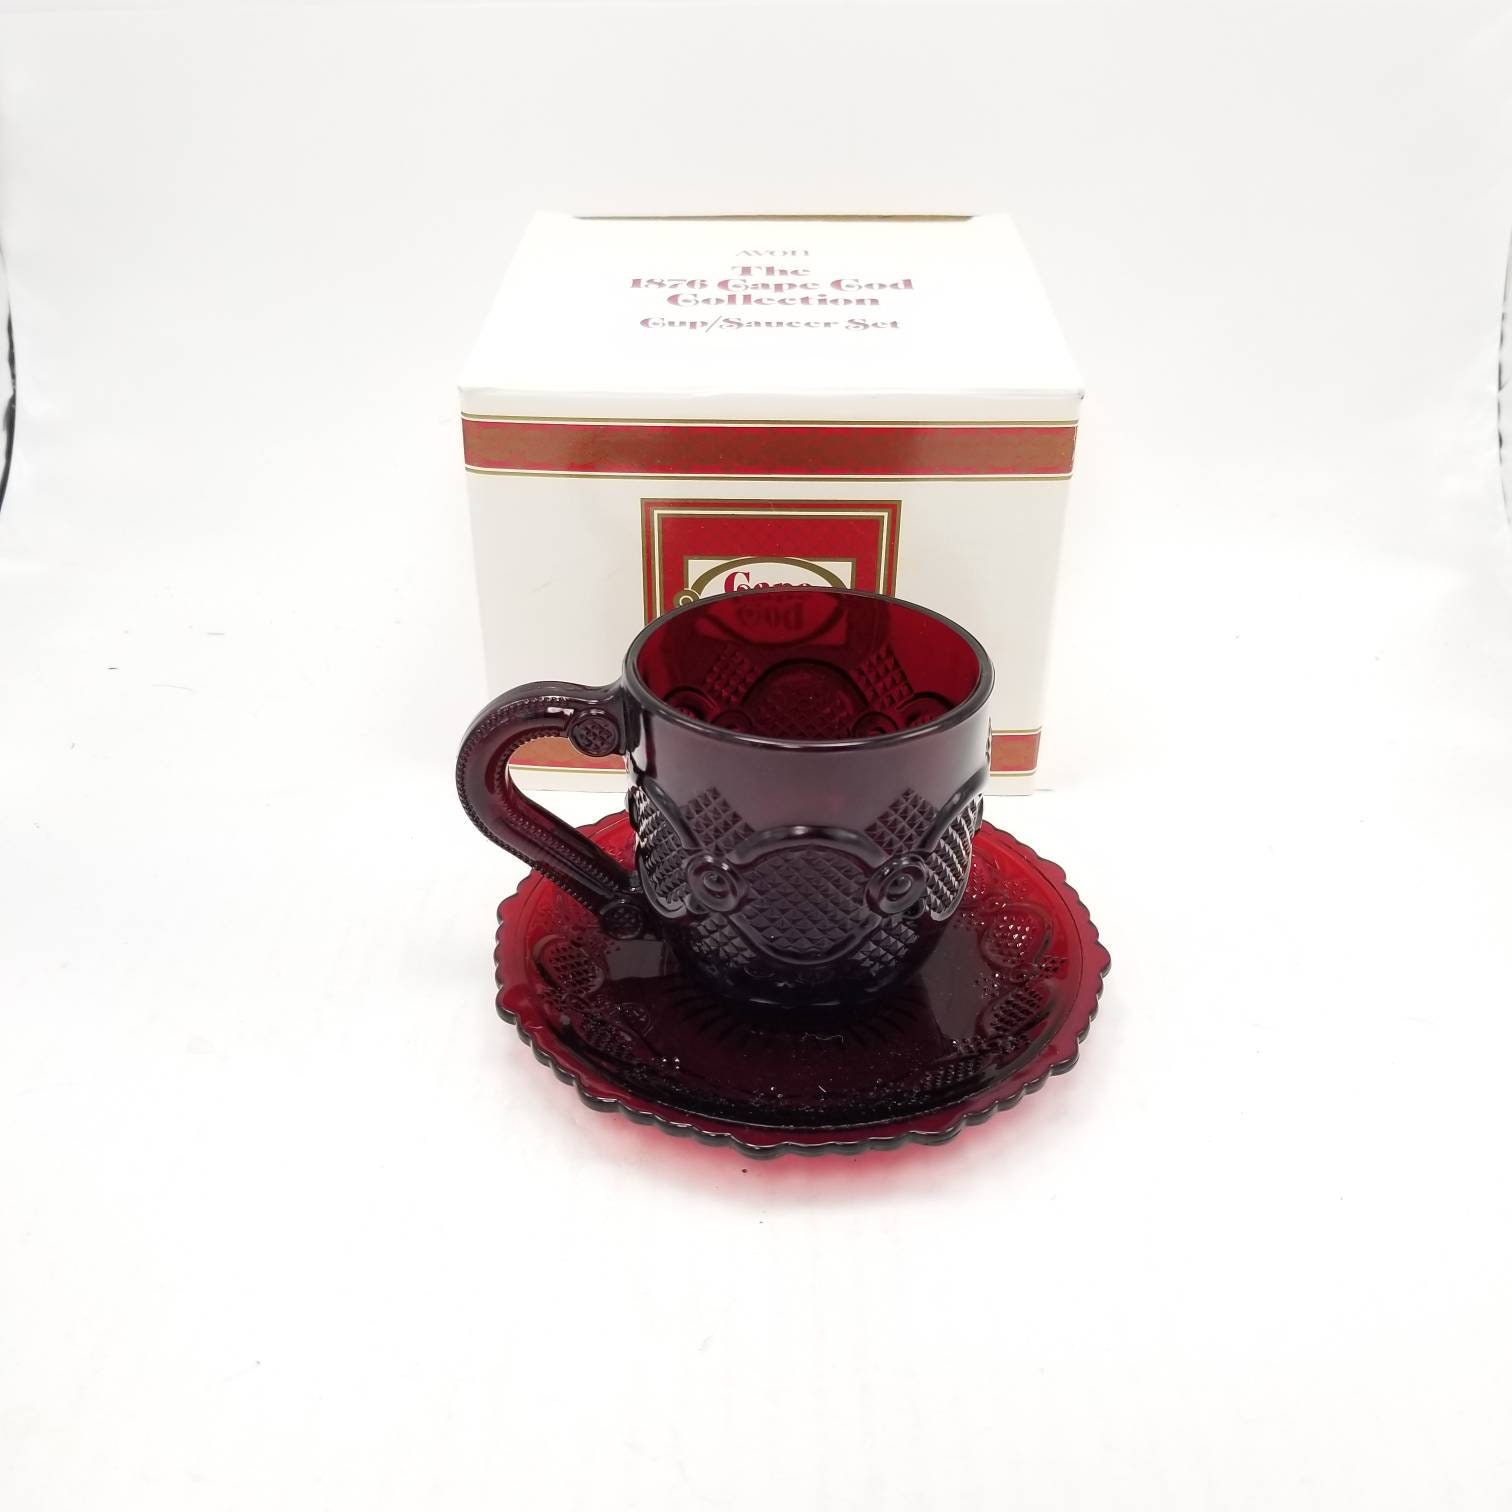 ONE VINTAGE AVON CAPE COD RUBY RED SERVING CUP AND SAUCER SET Brand New in Box 